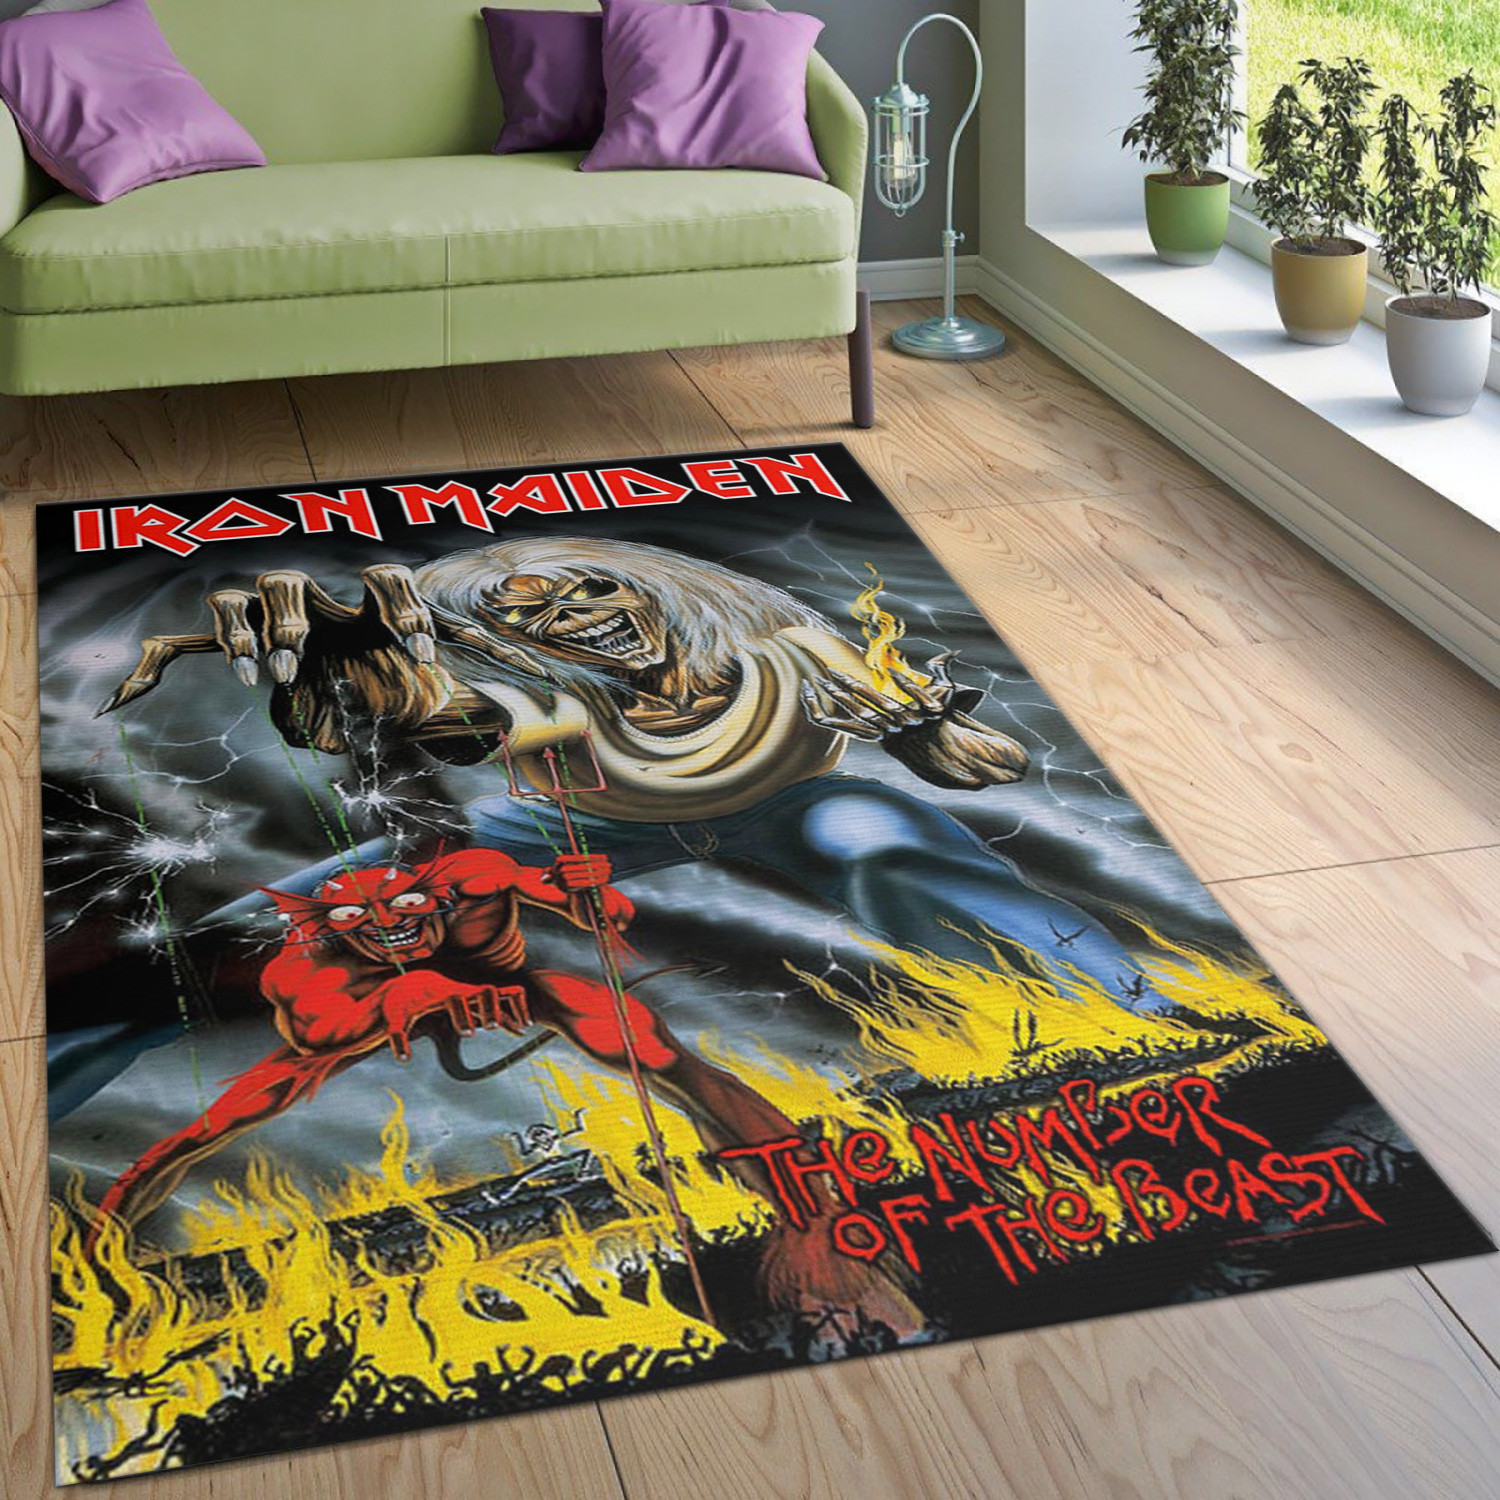 Iron Maiden Area Rug Rugs For Living Room Rug Home Decor 1